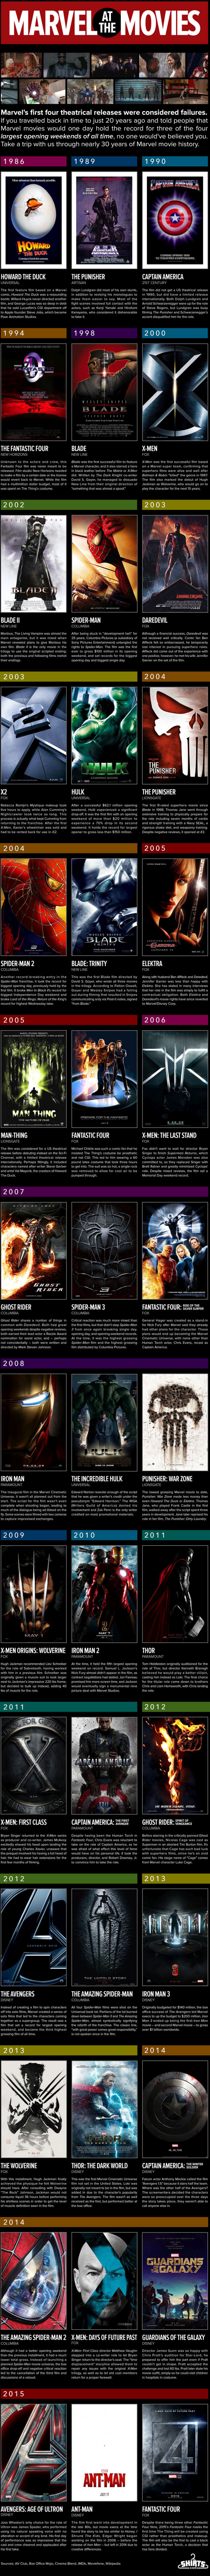 Take A Look Back At The History Of Marvel Movies (infographic)